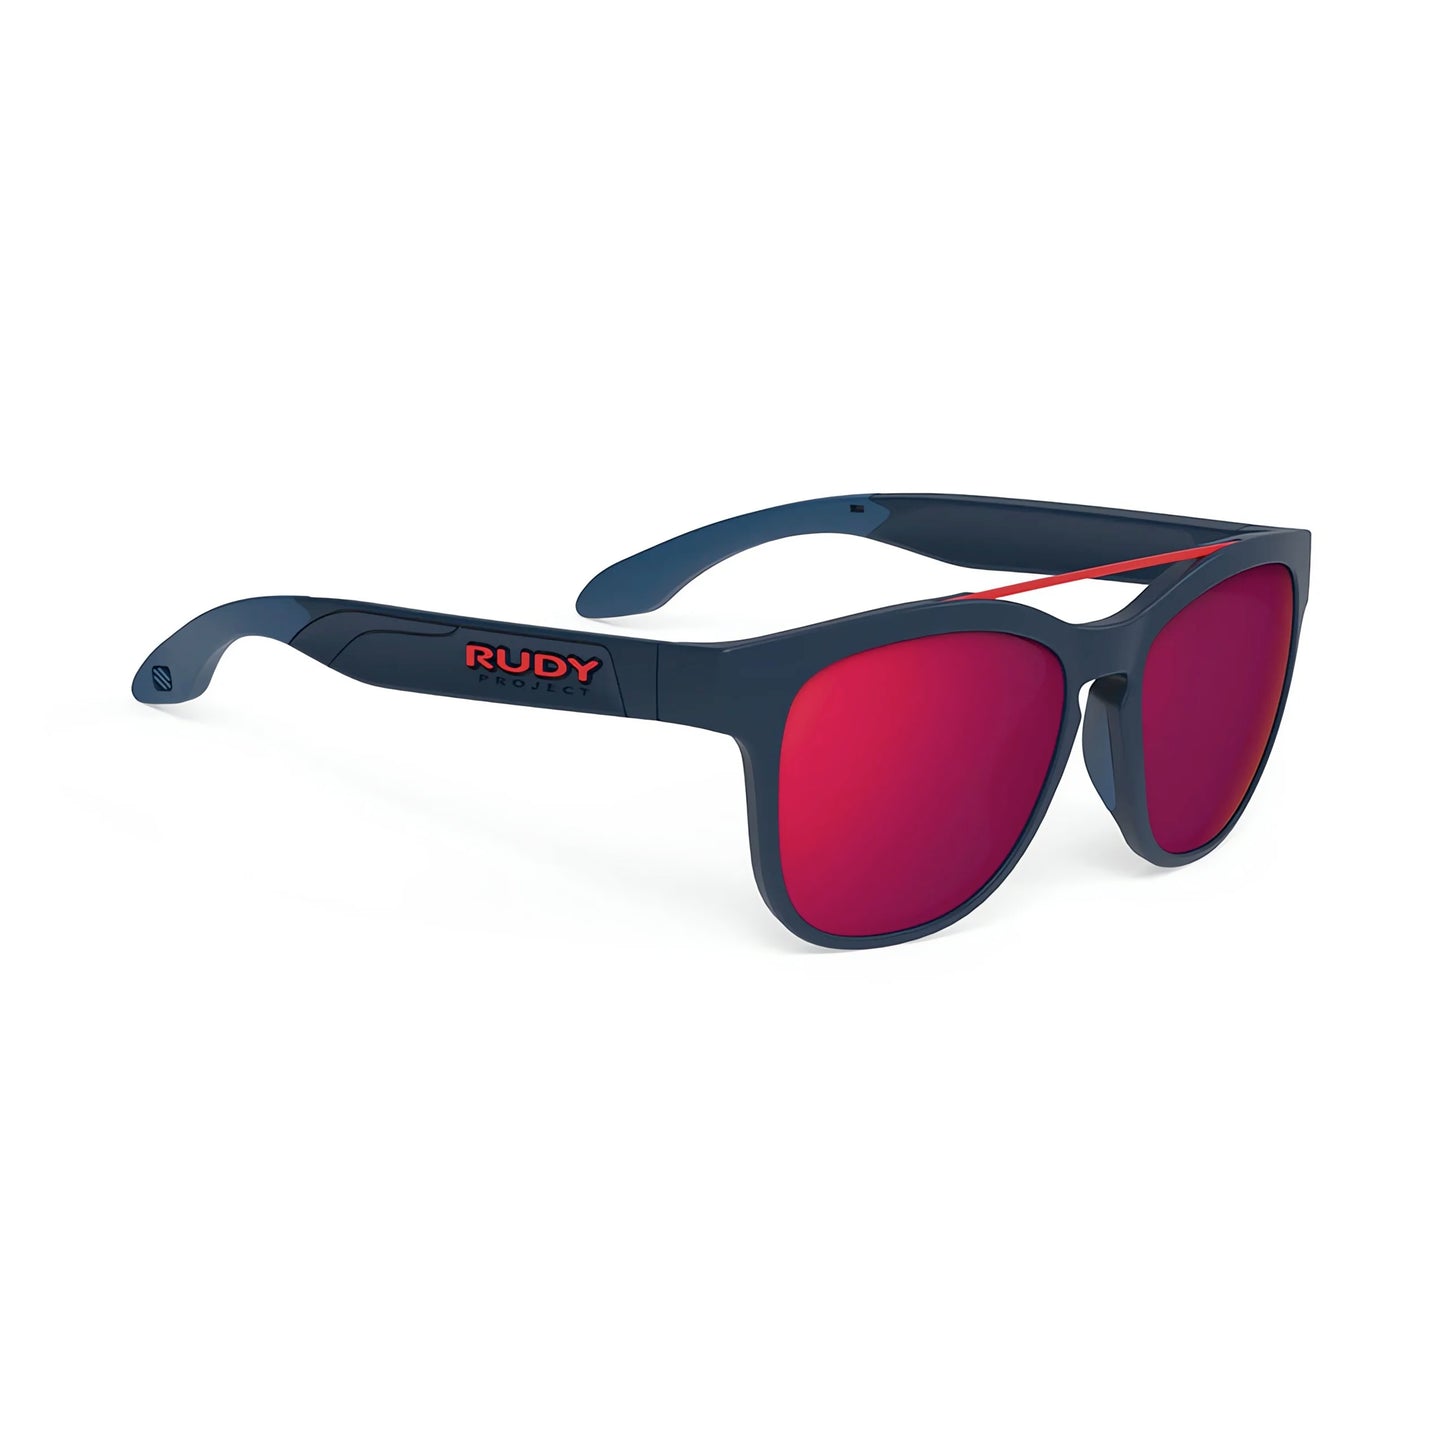 Rudy Project Spinair 59 Sunglasses Multilaser Red / Navy Blue Matte